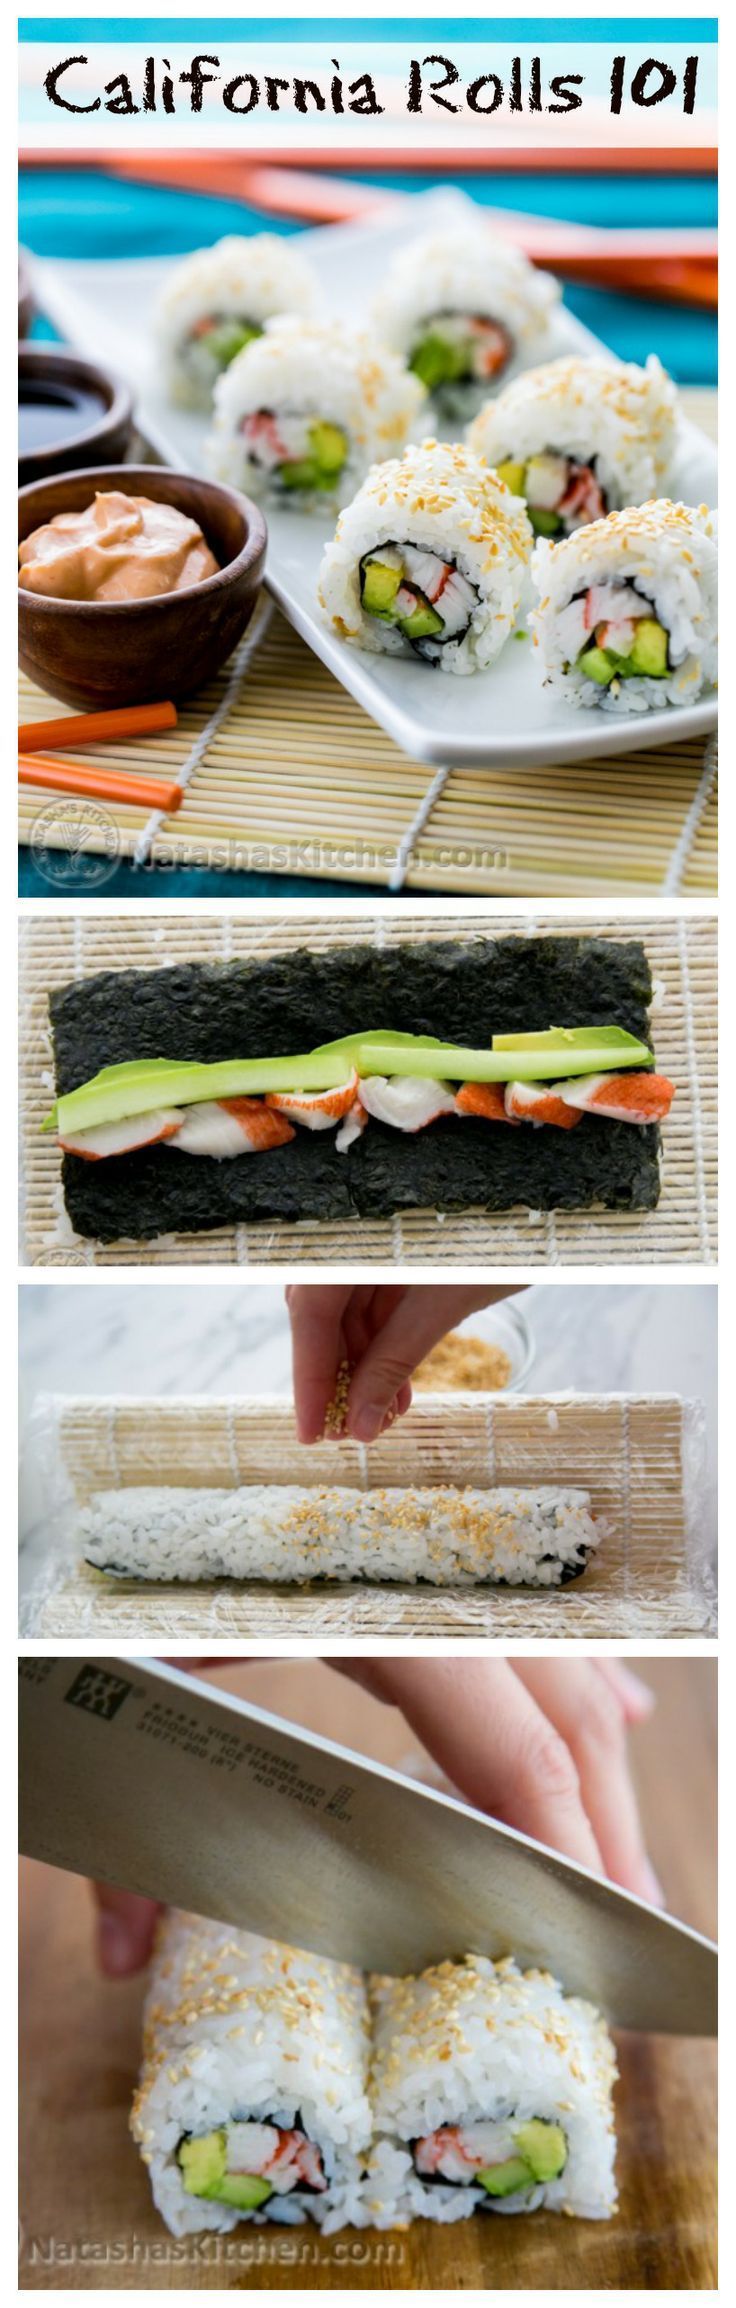 Everything you need to know to make the best California rolls: Perfect sushi rice, dips, sauces and secret techniques! A full